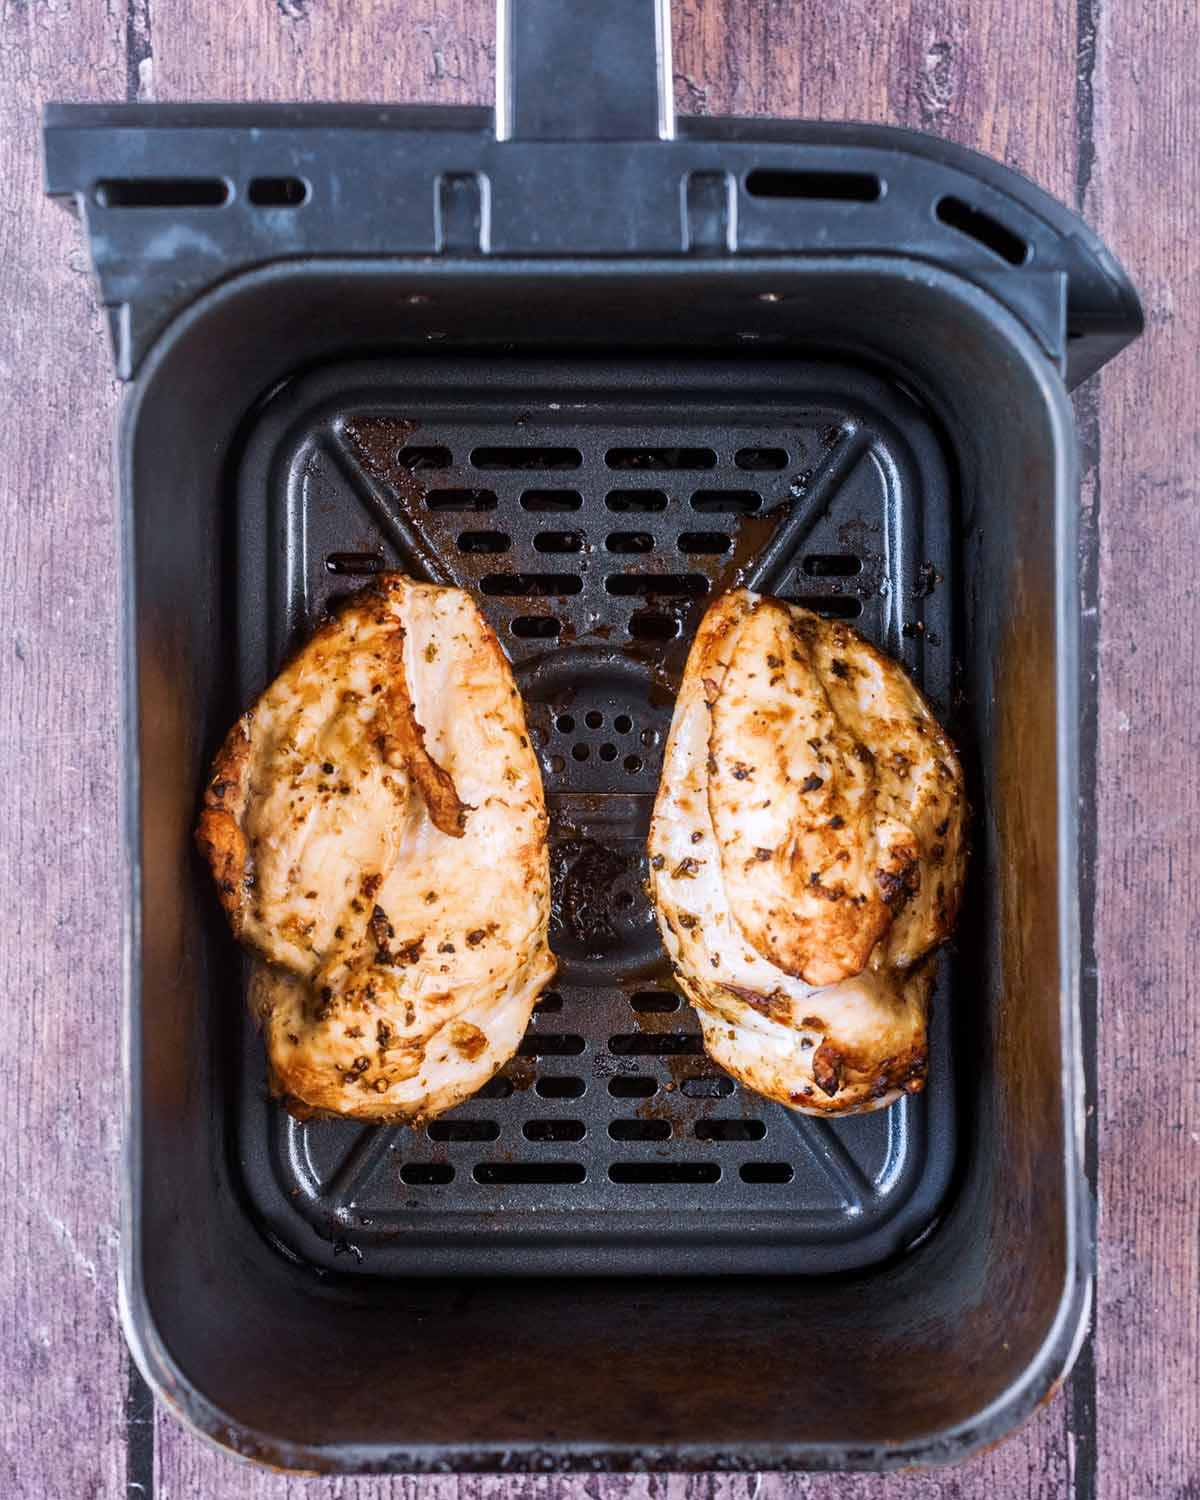 Cooked chicken breasts in an air fryer basket.